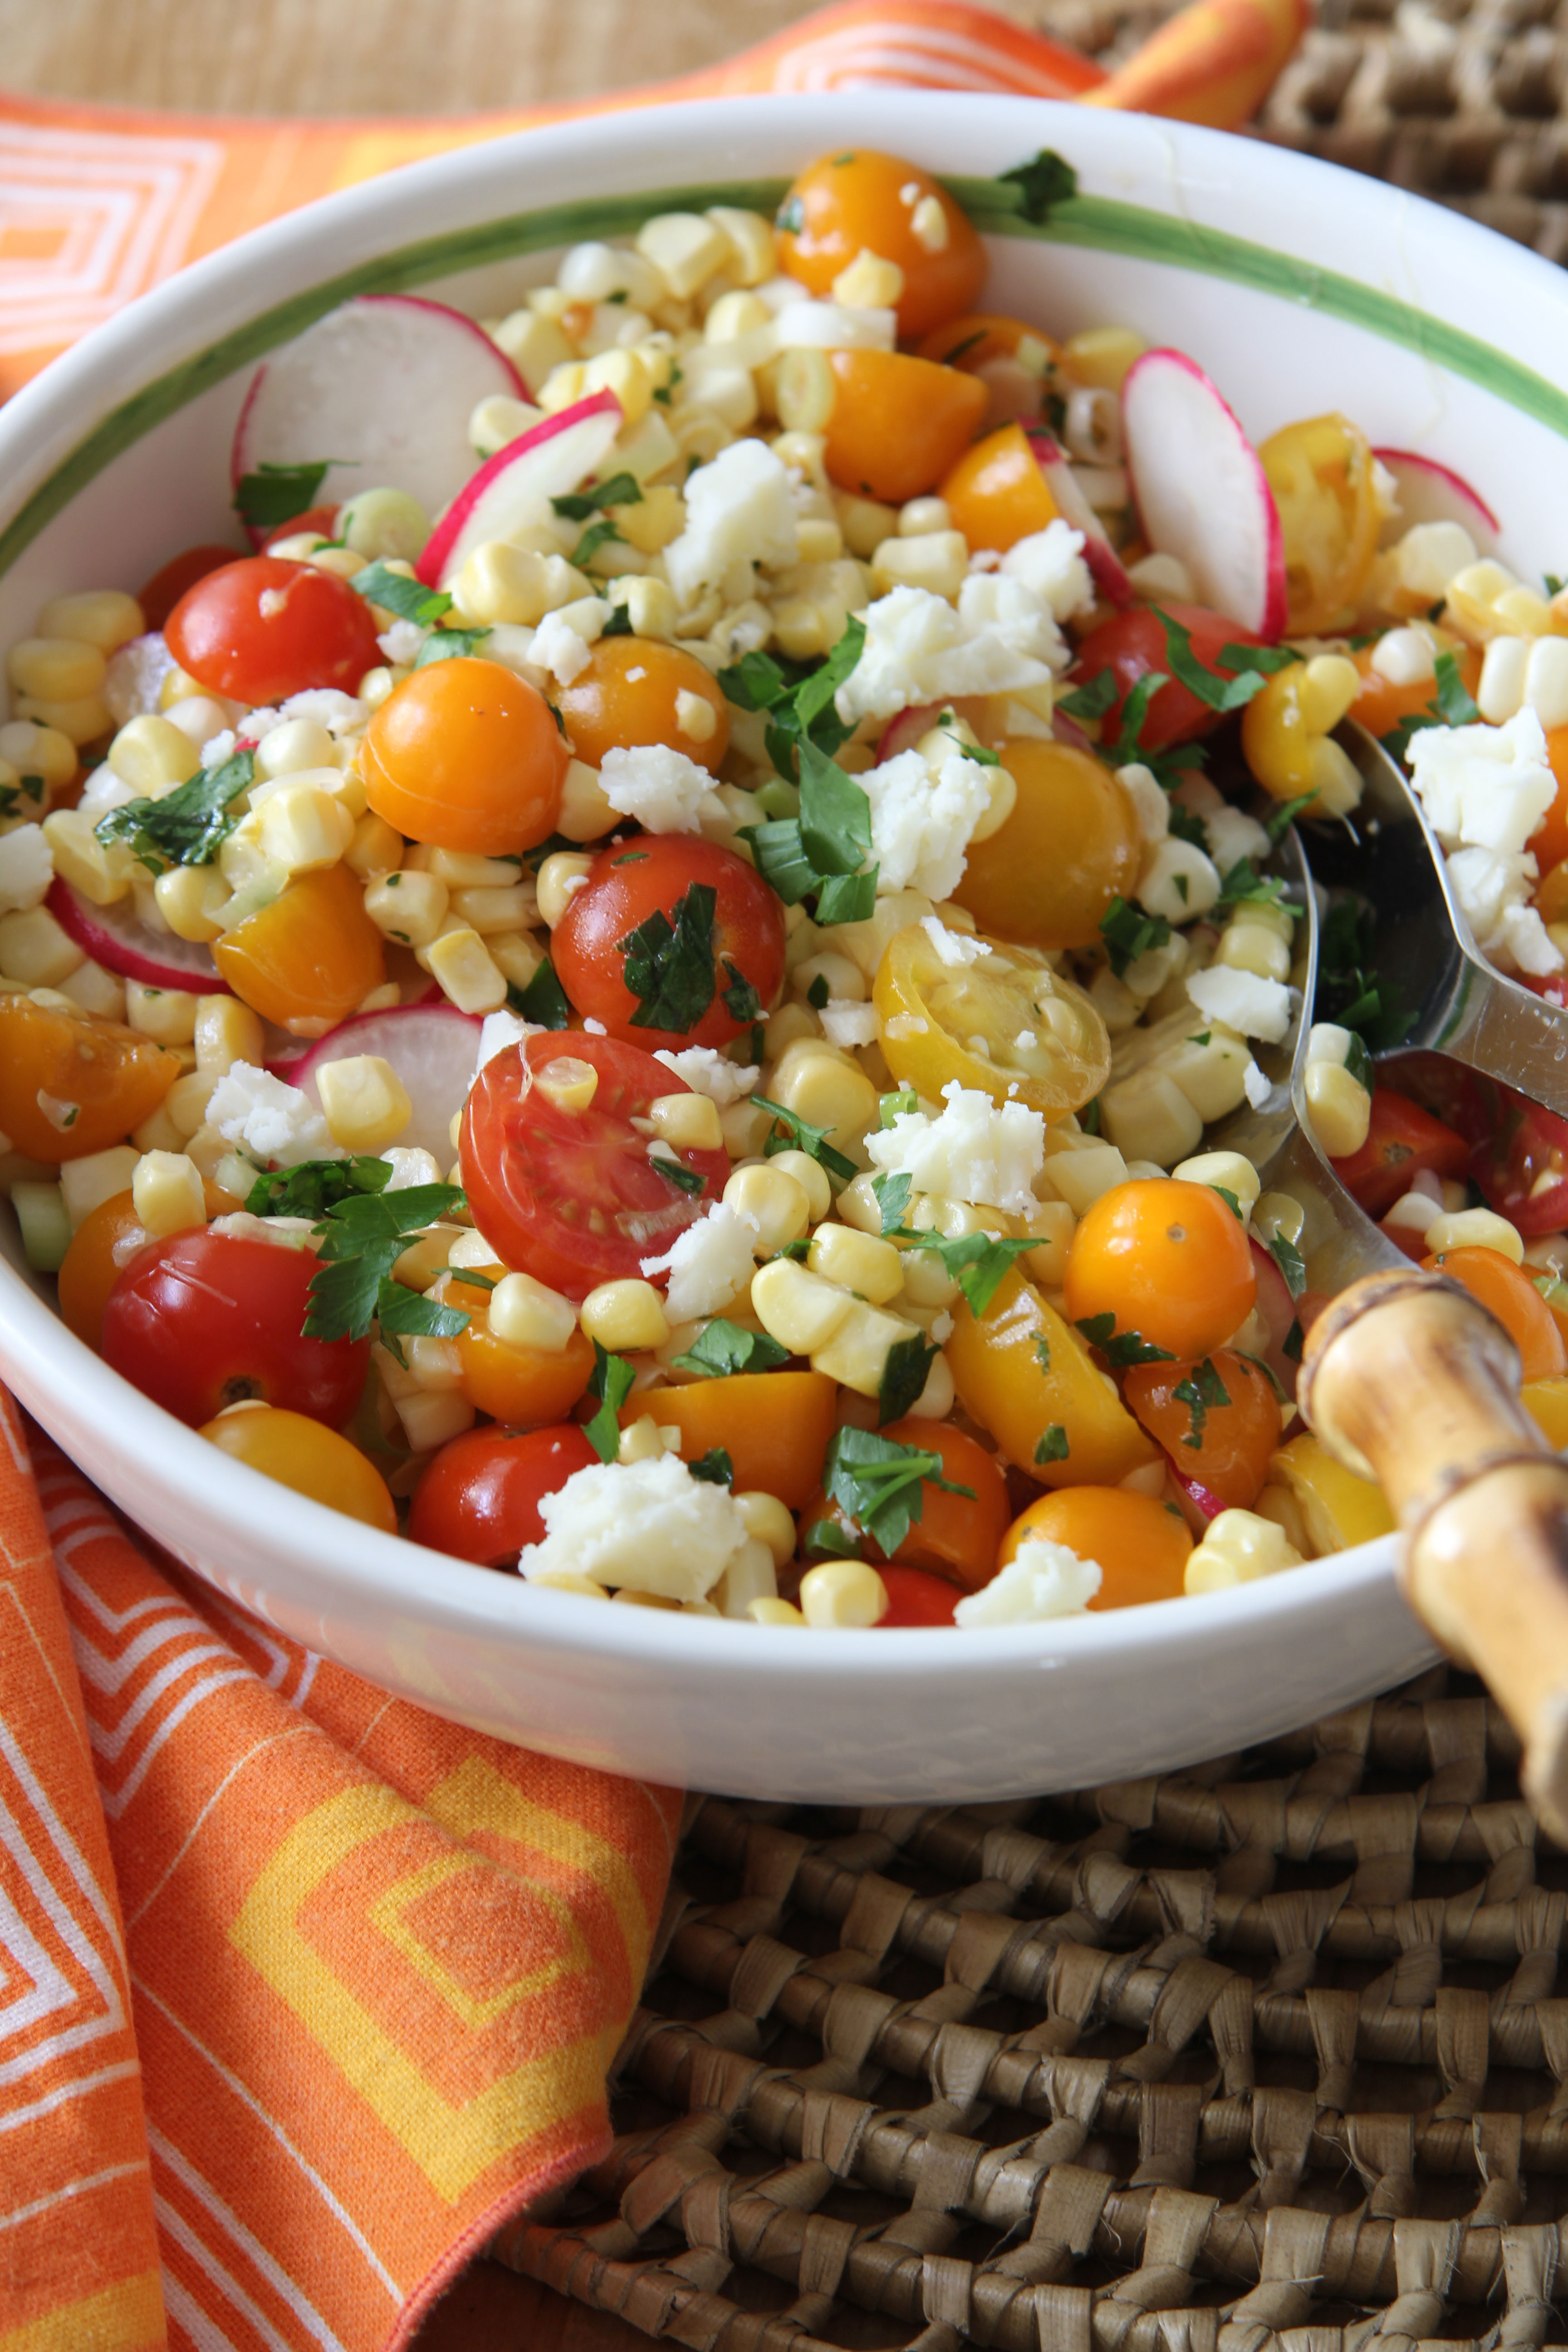 Looking for a bright, fresh corn salad to accompany their grilled steak, Ridgely Brode serves up this healthy Mexican corn salad to rave reviews.